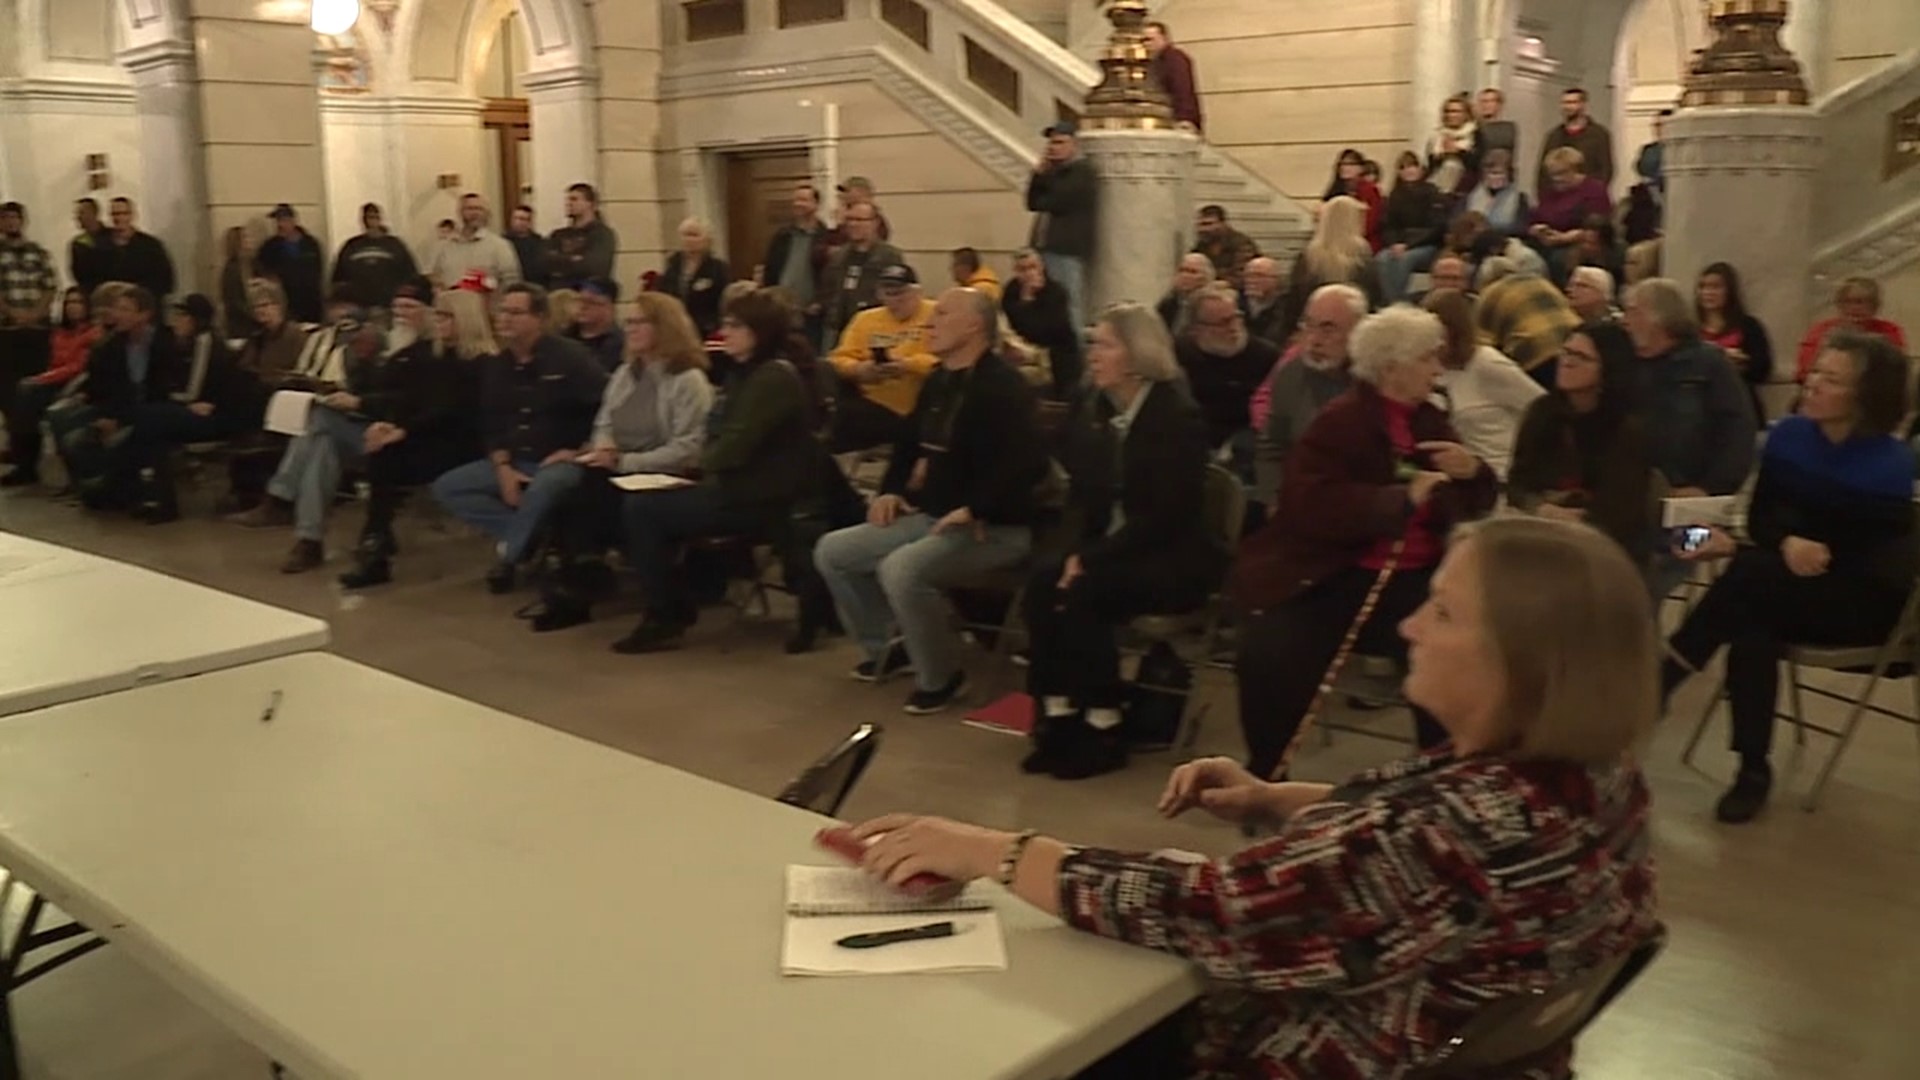 The board of elections held a special meeting Monday night at the Luzerne County Courthouse.